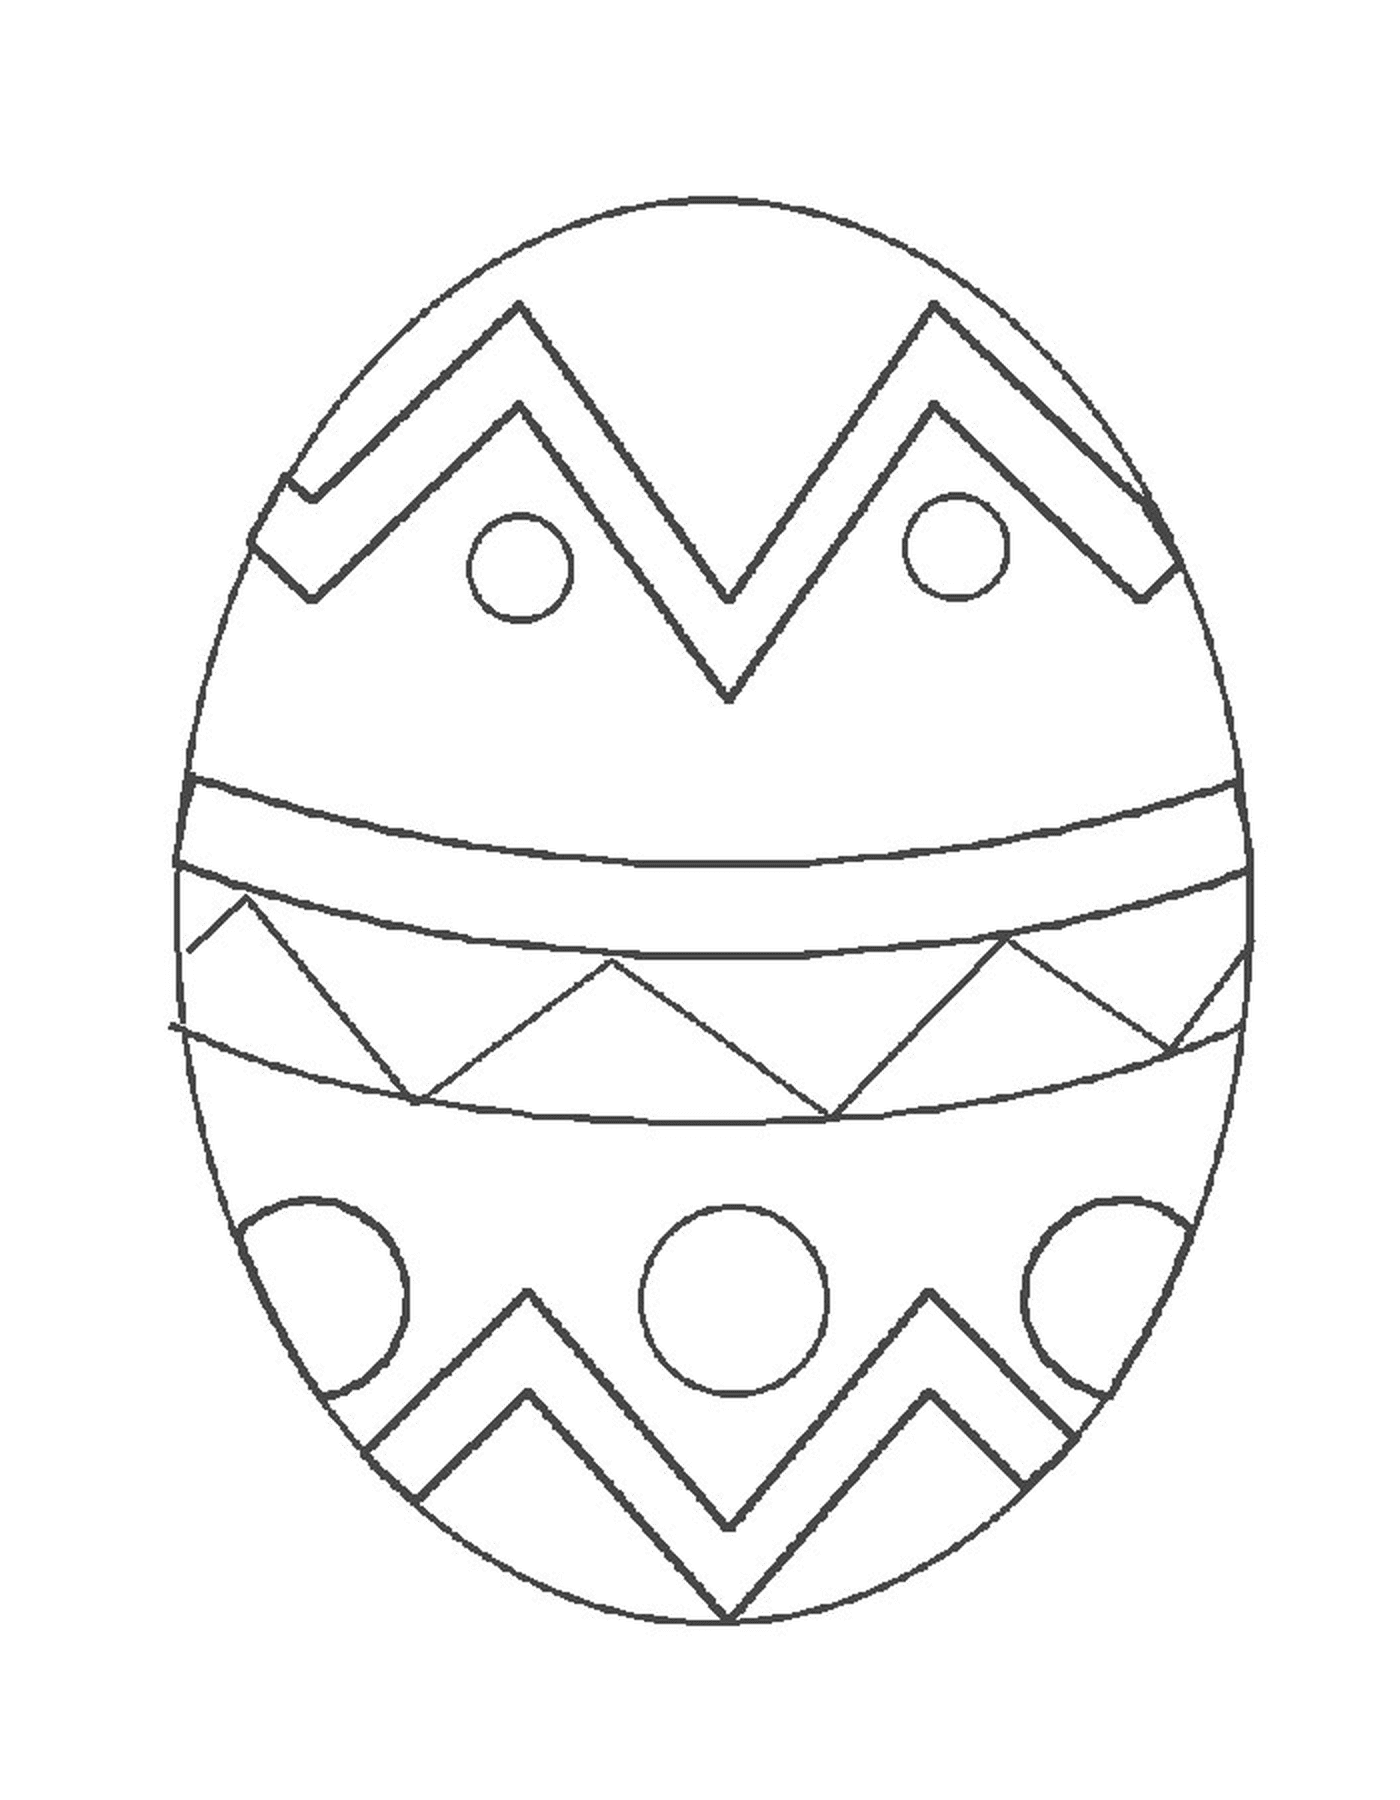  Easter egg with geometric design 